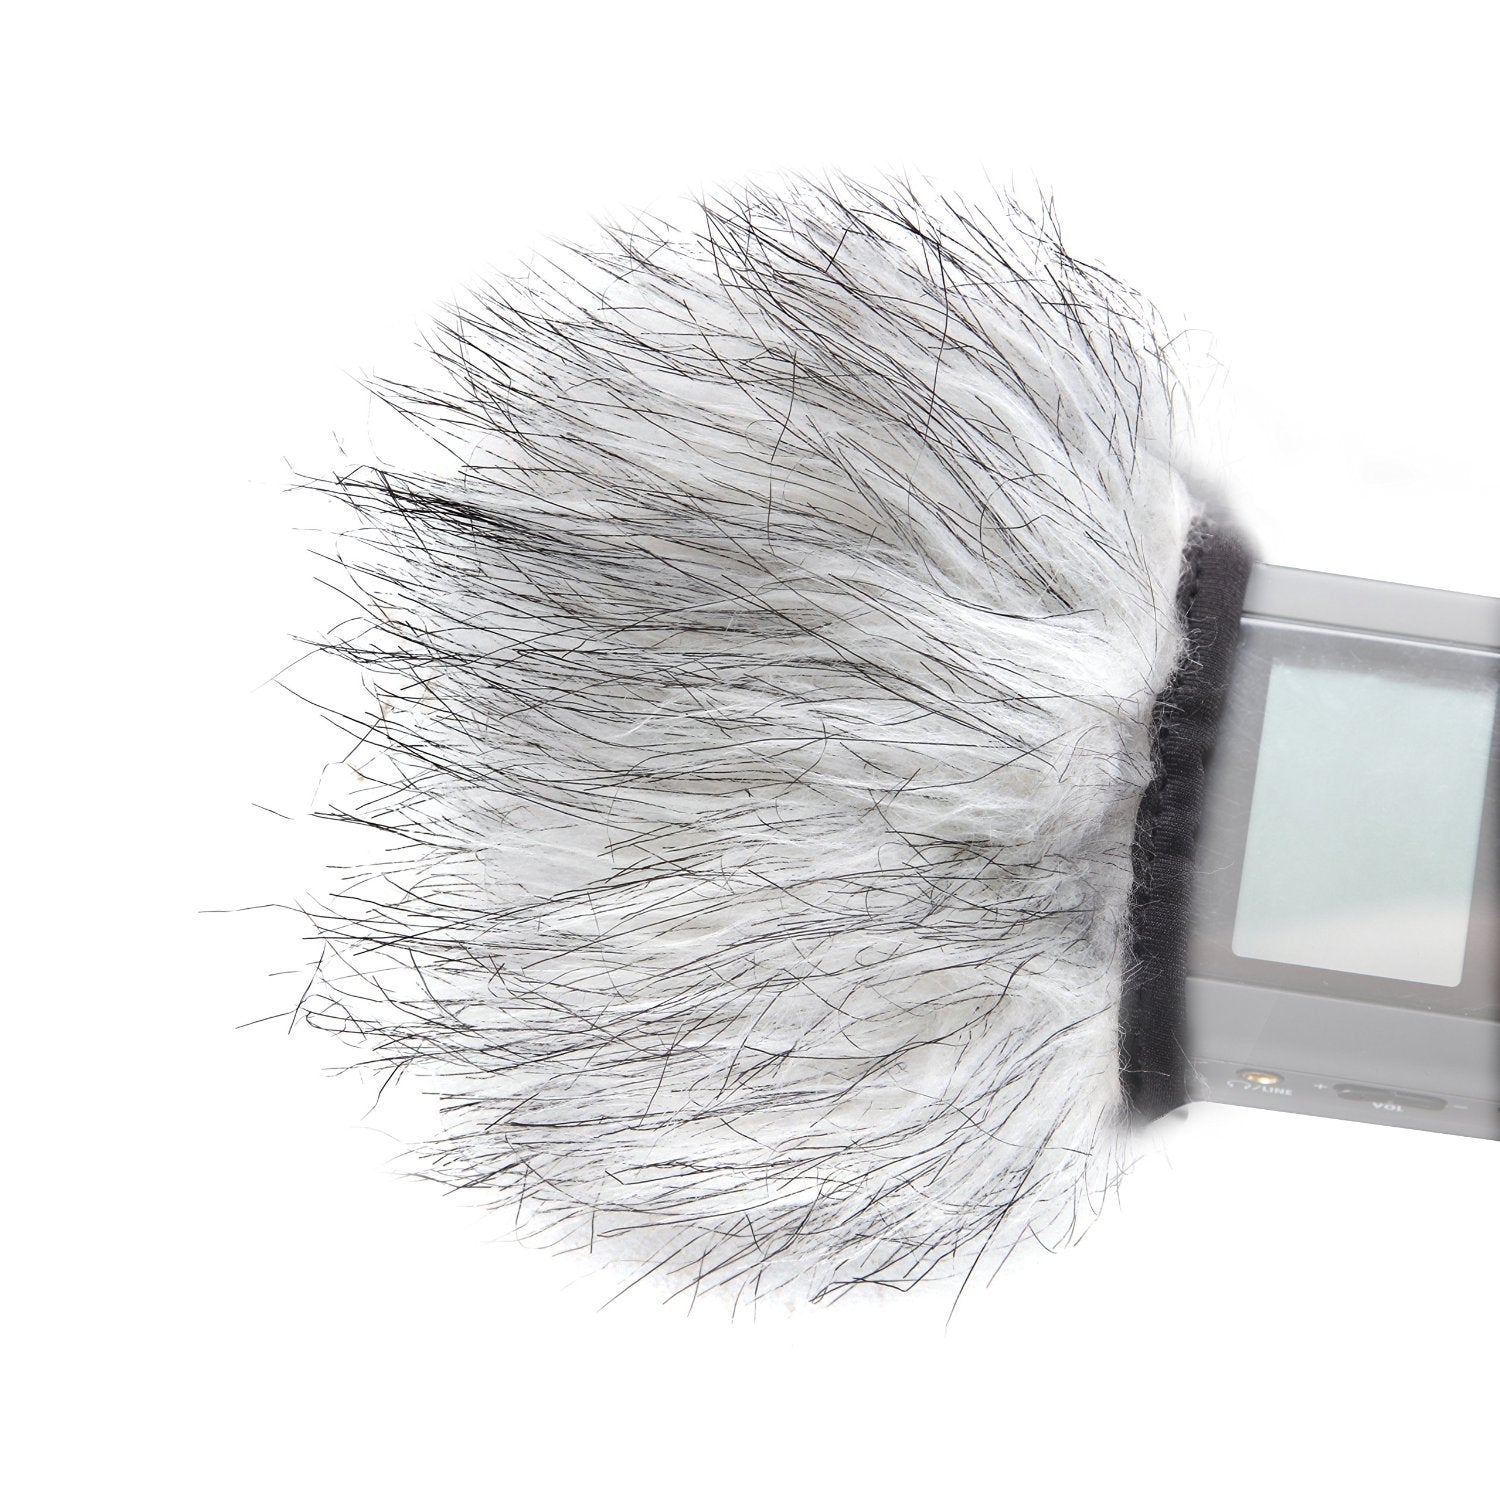 BOYA BY-WS9 Furry Outdoor Microphone Windscreen for Portable Digital Recorders up to 8cm X 4cm (W x D) - Fits the Zoom H4n, H5, H6, Tascam DR-40, DR-05, DR-07 & Similar Recorders